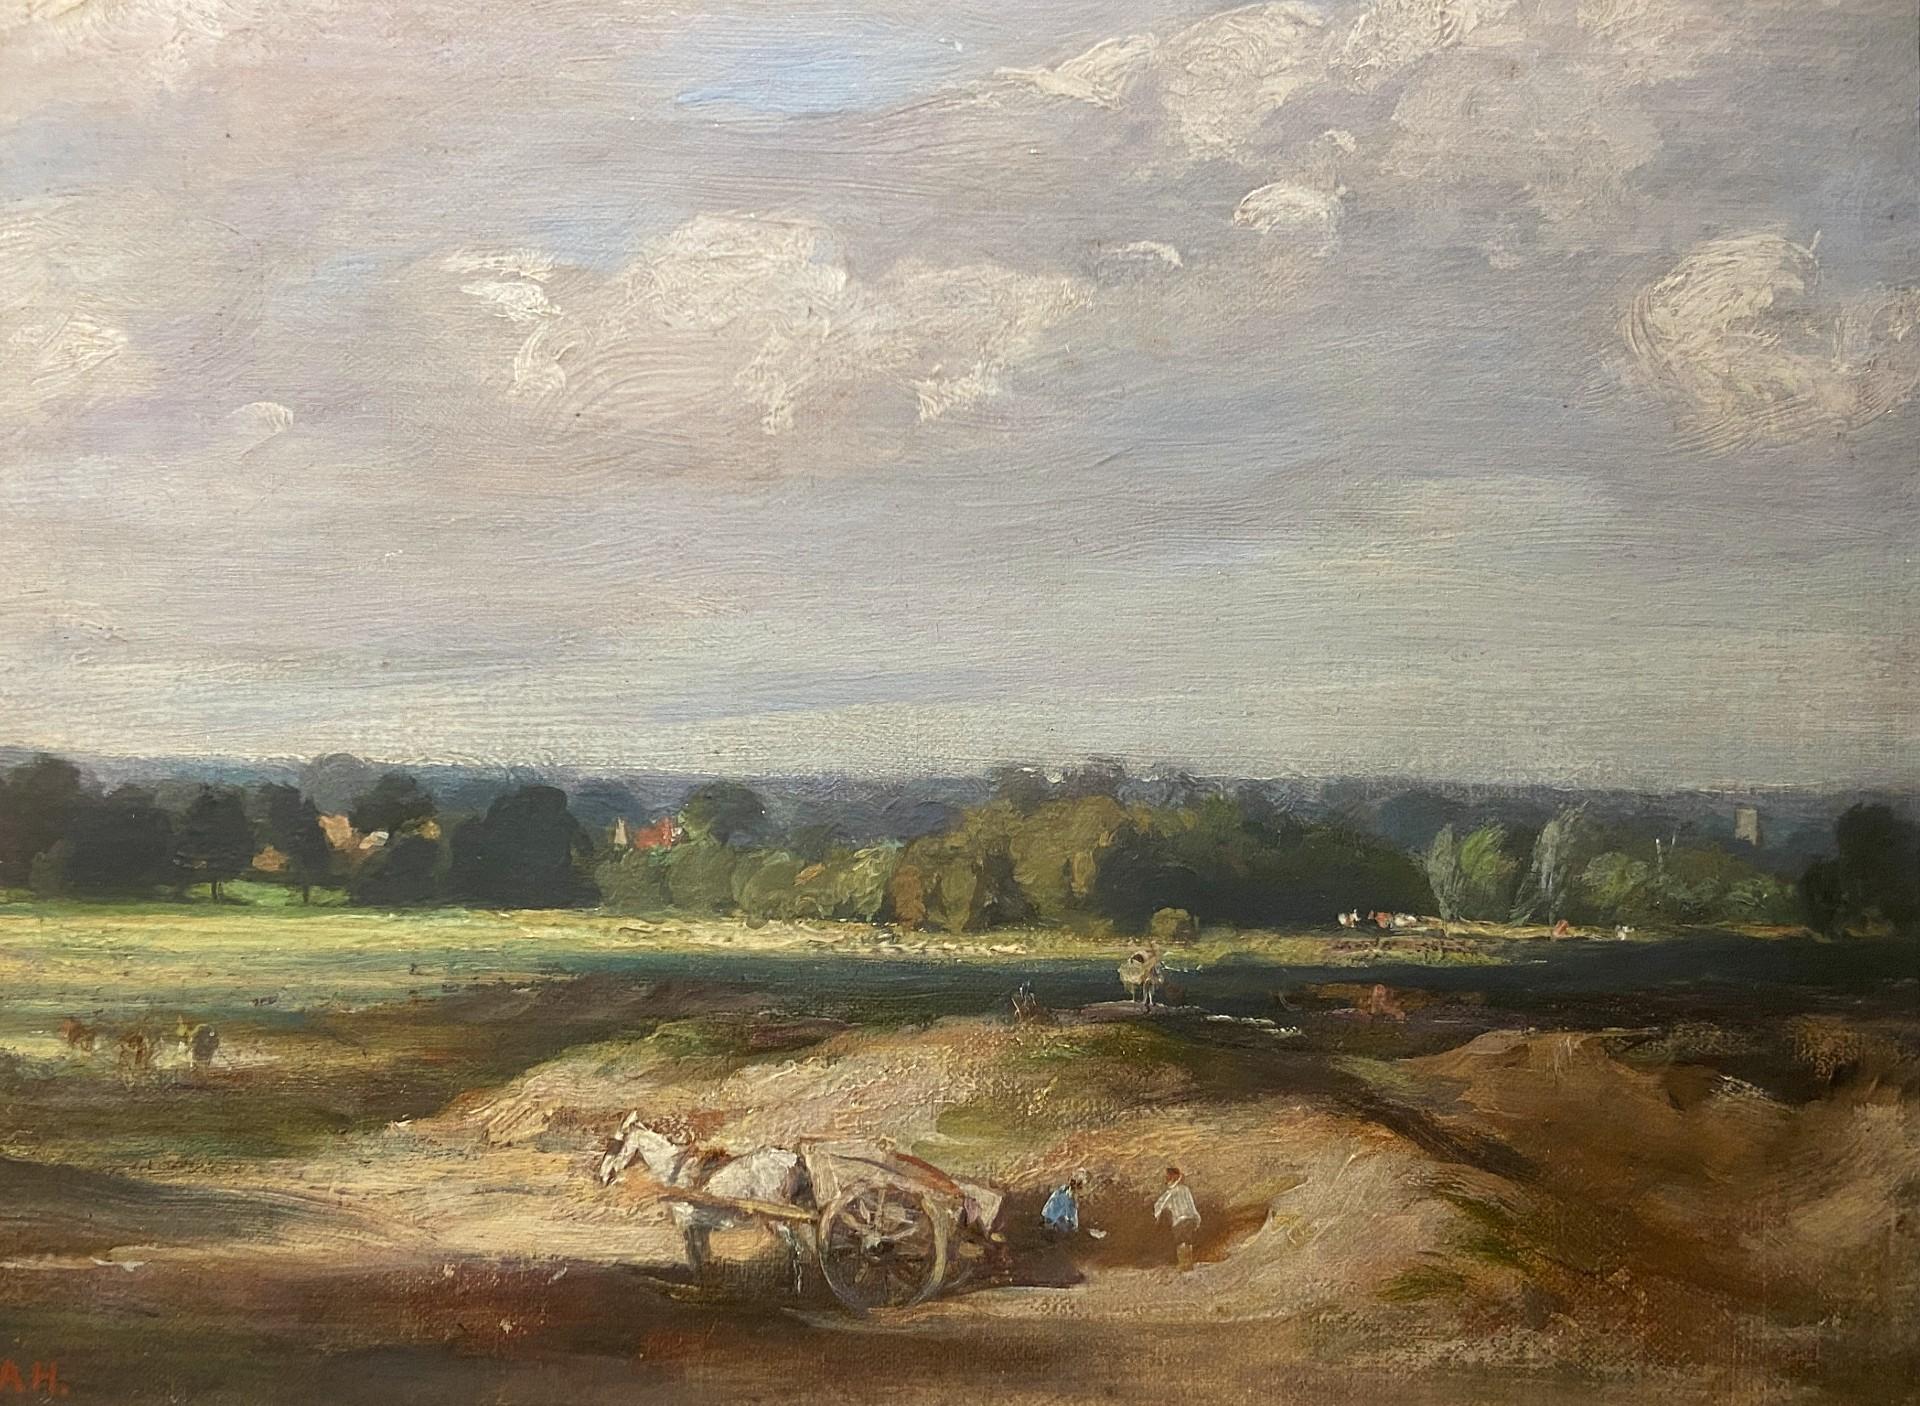 ALFRED ROBERT HAYWARD Landscape Painting - The Sand Pit, 1905 Oil Painting, English Pastoral Landscape